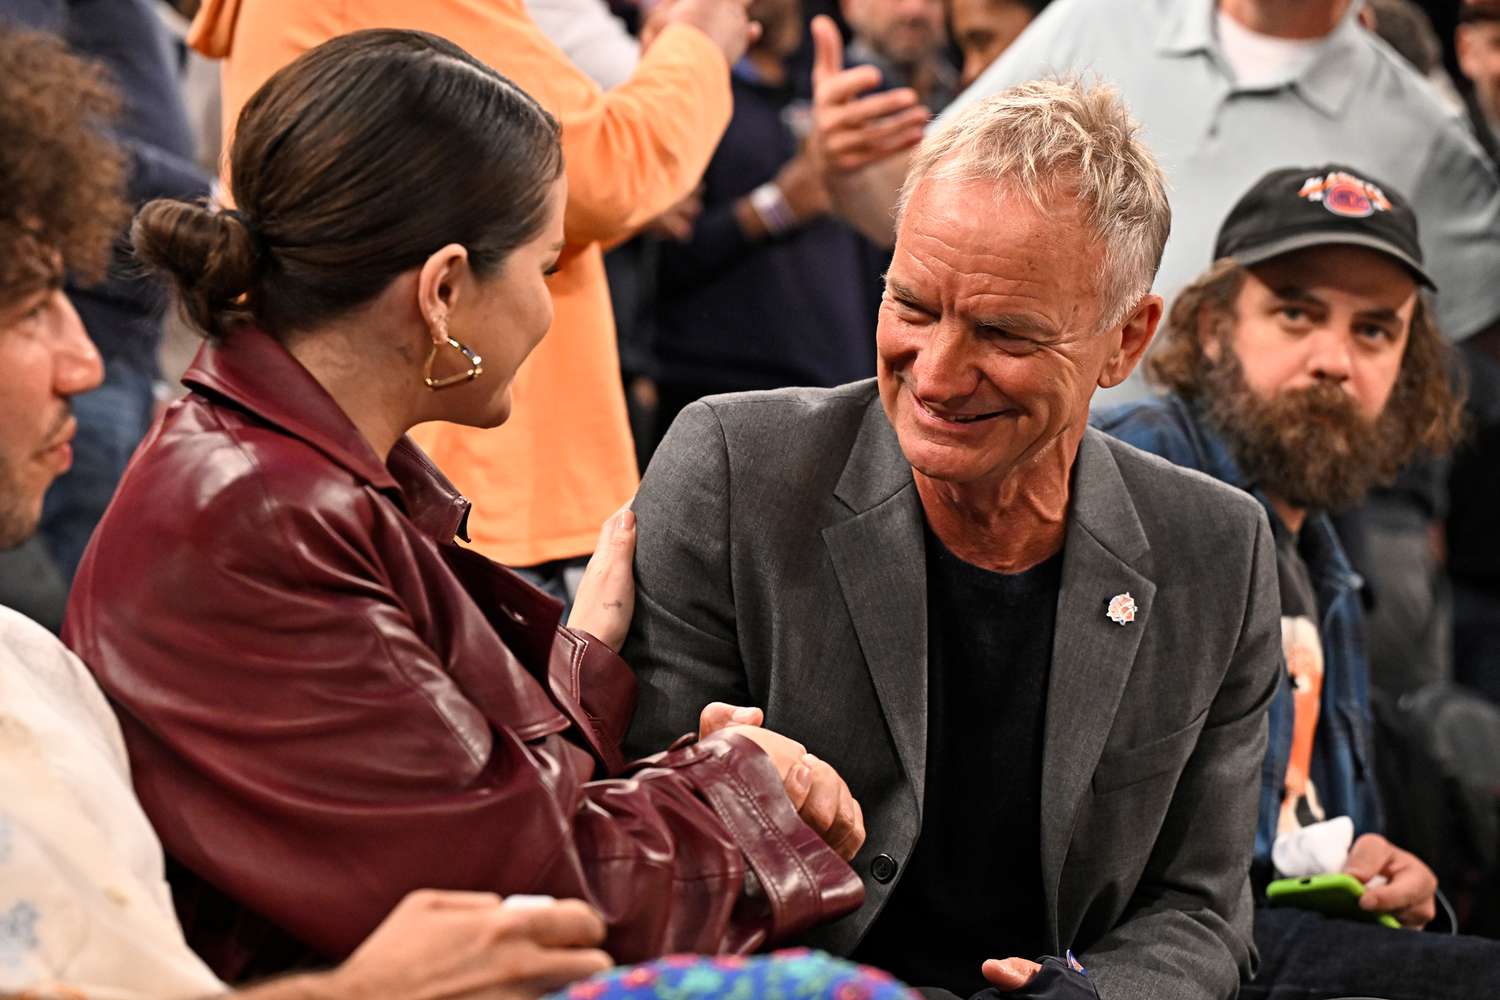 Selena Gomez (left) shaking hands with Sting in New York City on April 22, 2024